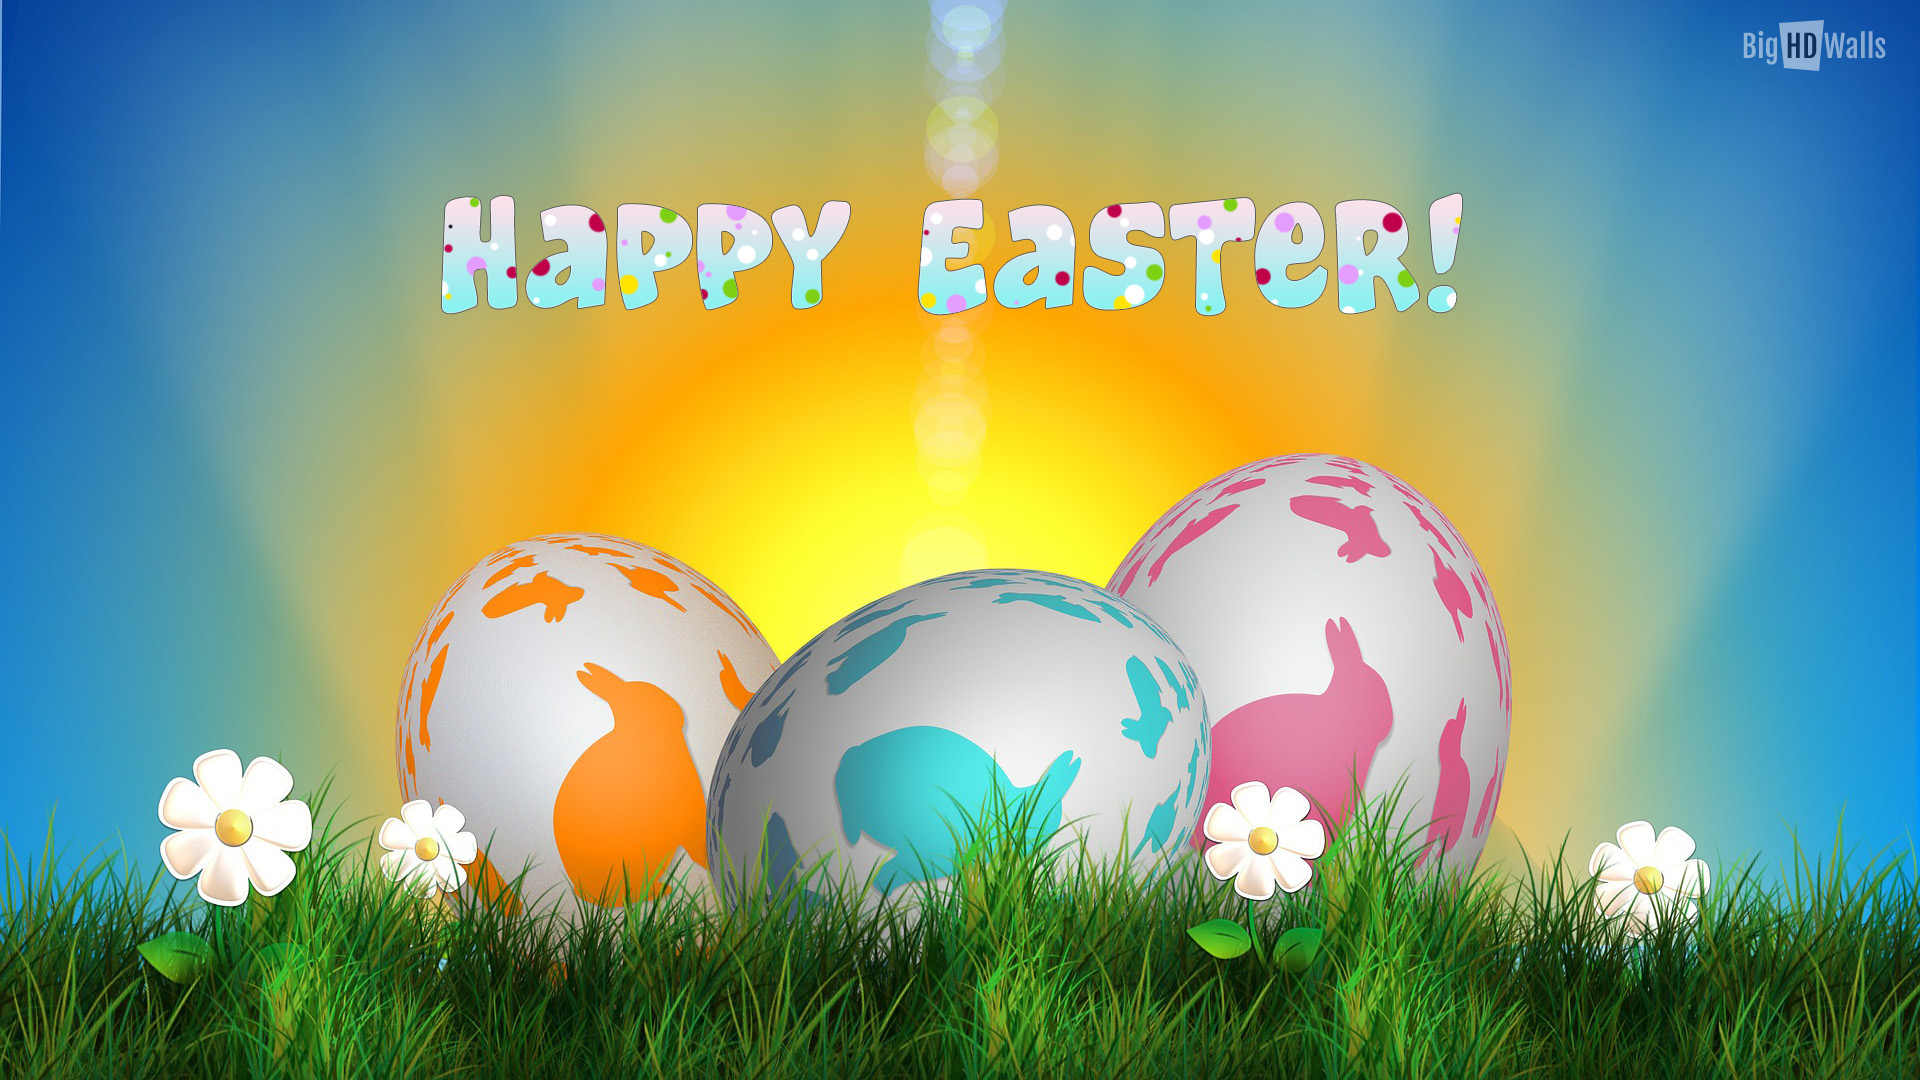 Collection Of Awesome Easter Wallpaper For Your Desktop Click On